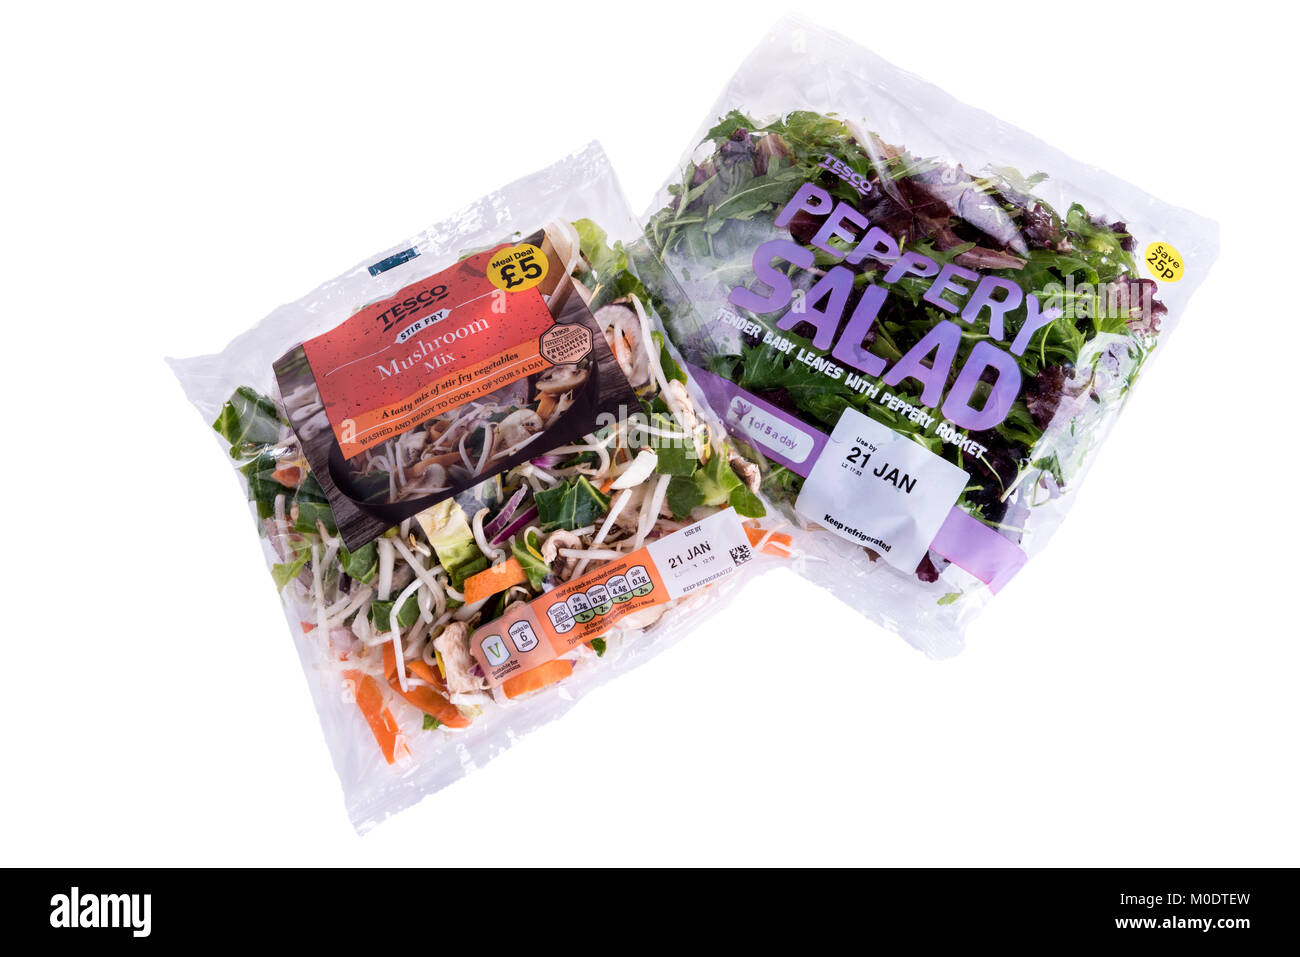 Two bags of Tesco prepared salad mix, supermarket plastic packaging. Stock Photo